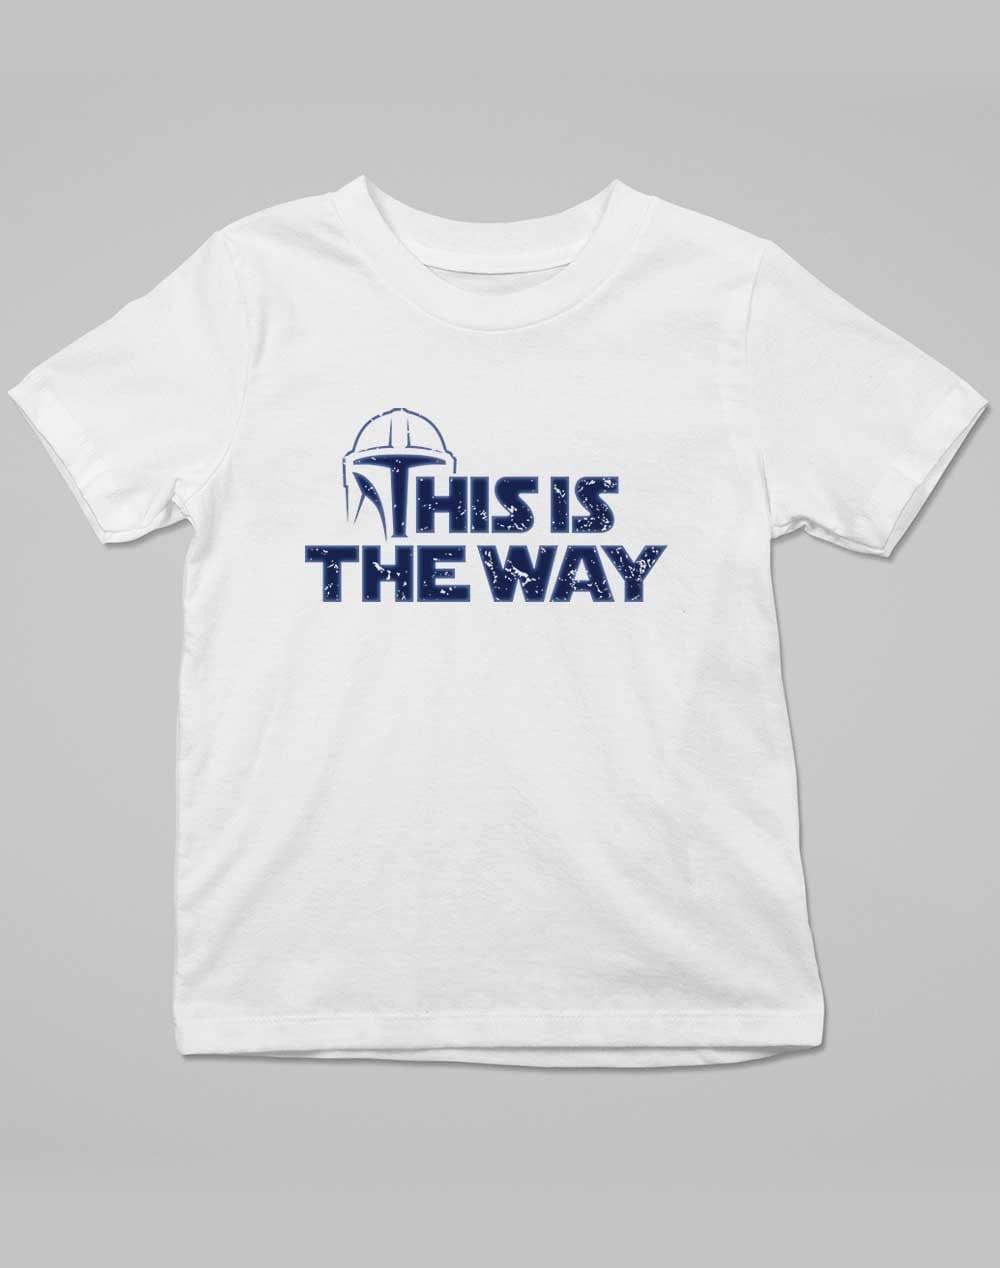 This is the Way - Kids T-Shirt 3-4 years / White  - Off World Tees